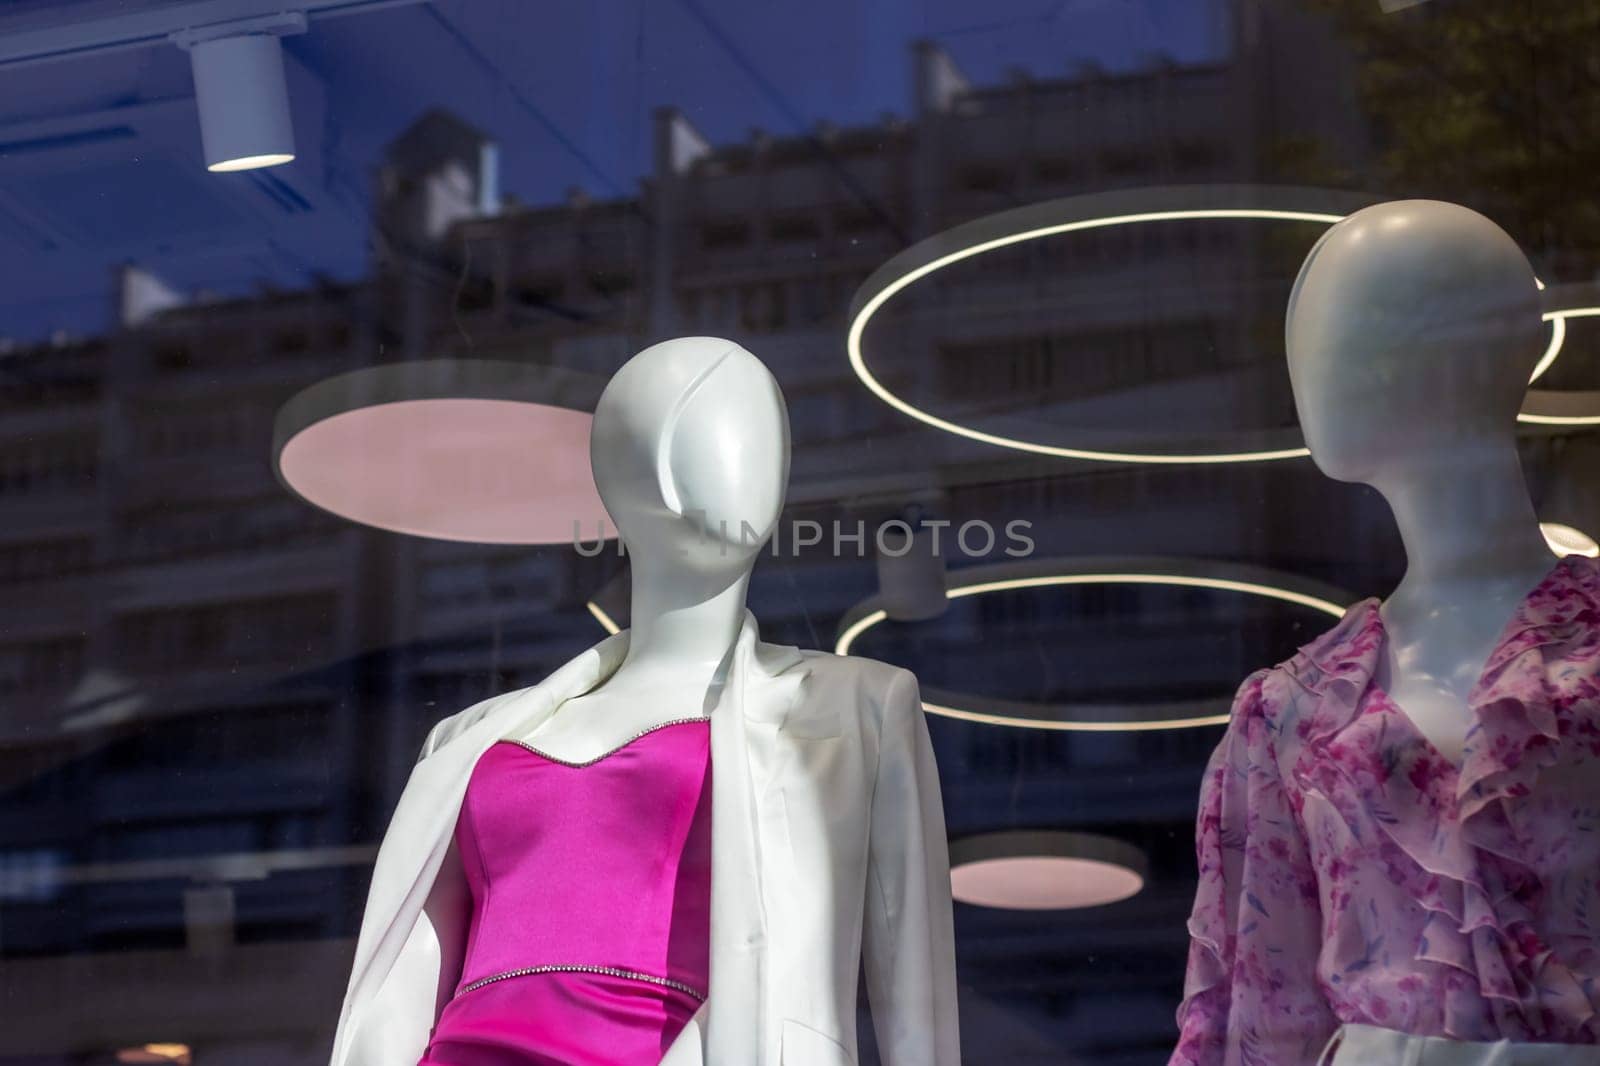 Two mannequins in a retail store window are showcased wearing fun pink dresses and stylish eyewear. The fashion design event features magenta headgear for a touch of whimsy and leisure